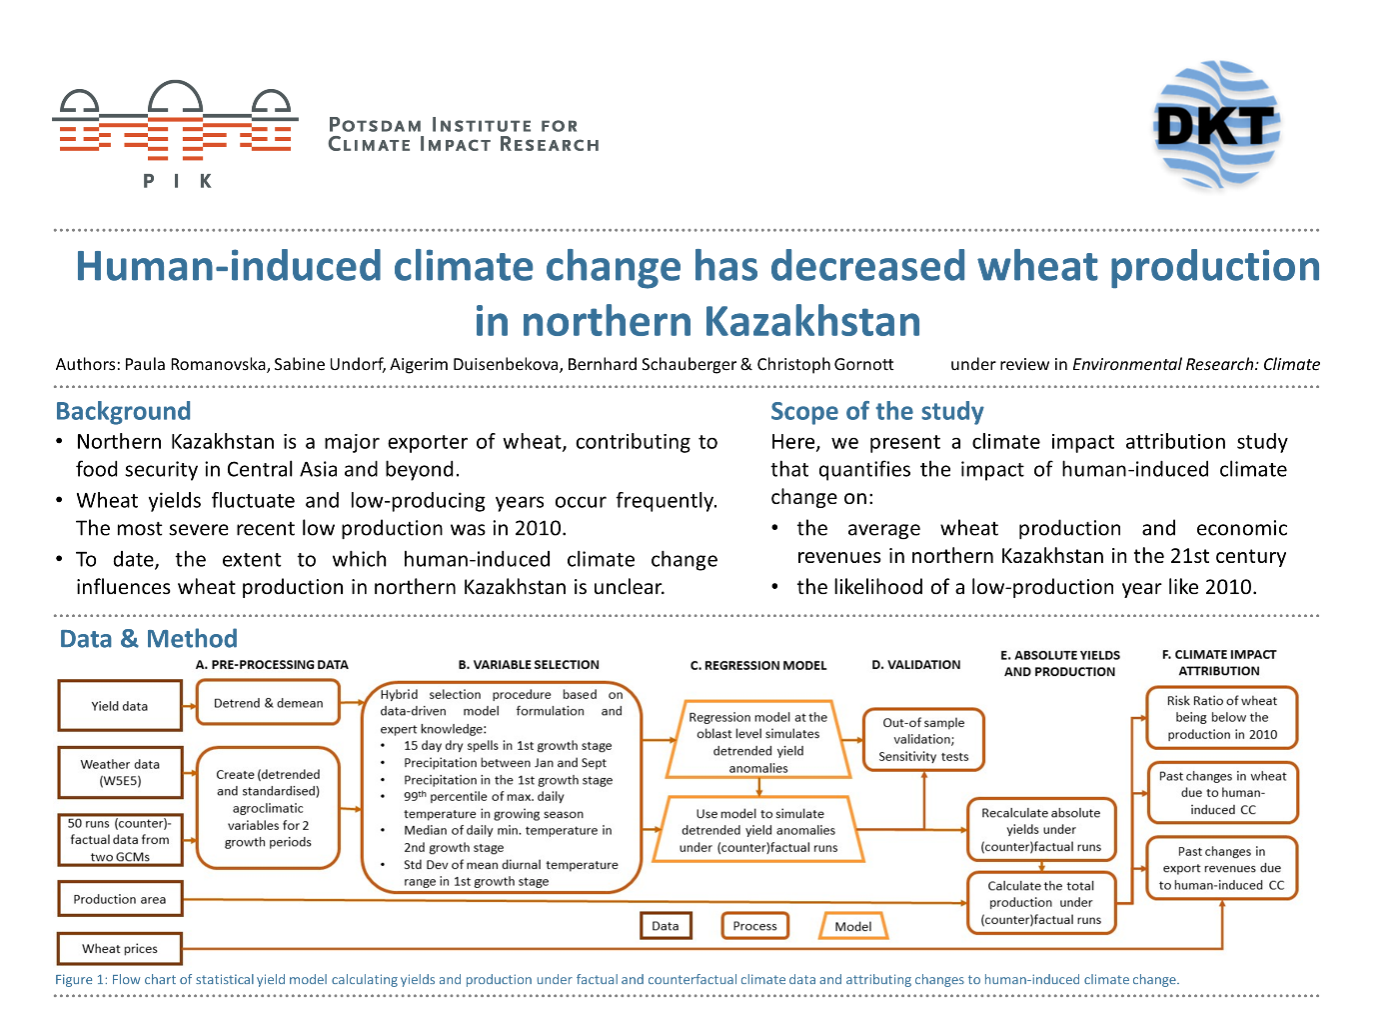 Paula Romanovska has presented latest results on the impacts of climate change on wheat production in Kazakhstan on the “13. Deutsche Klimatagung”